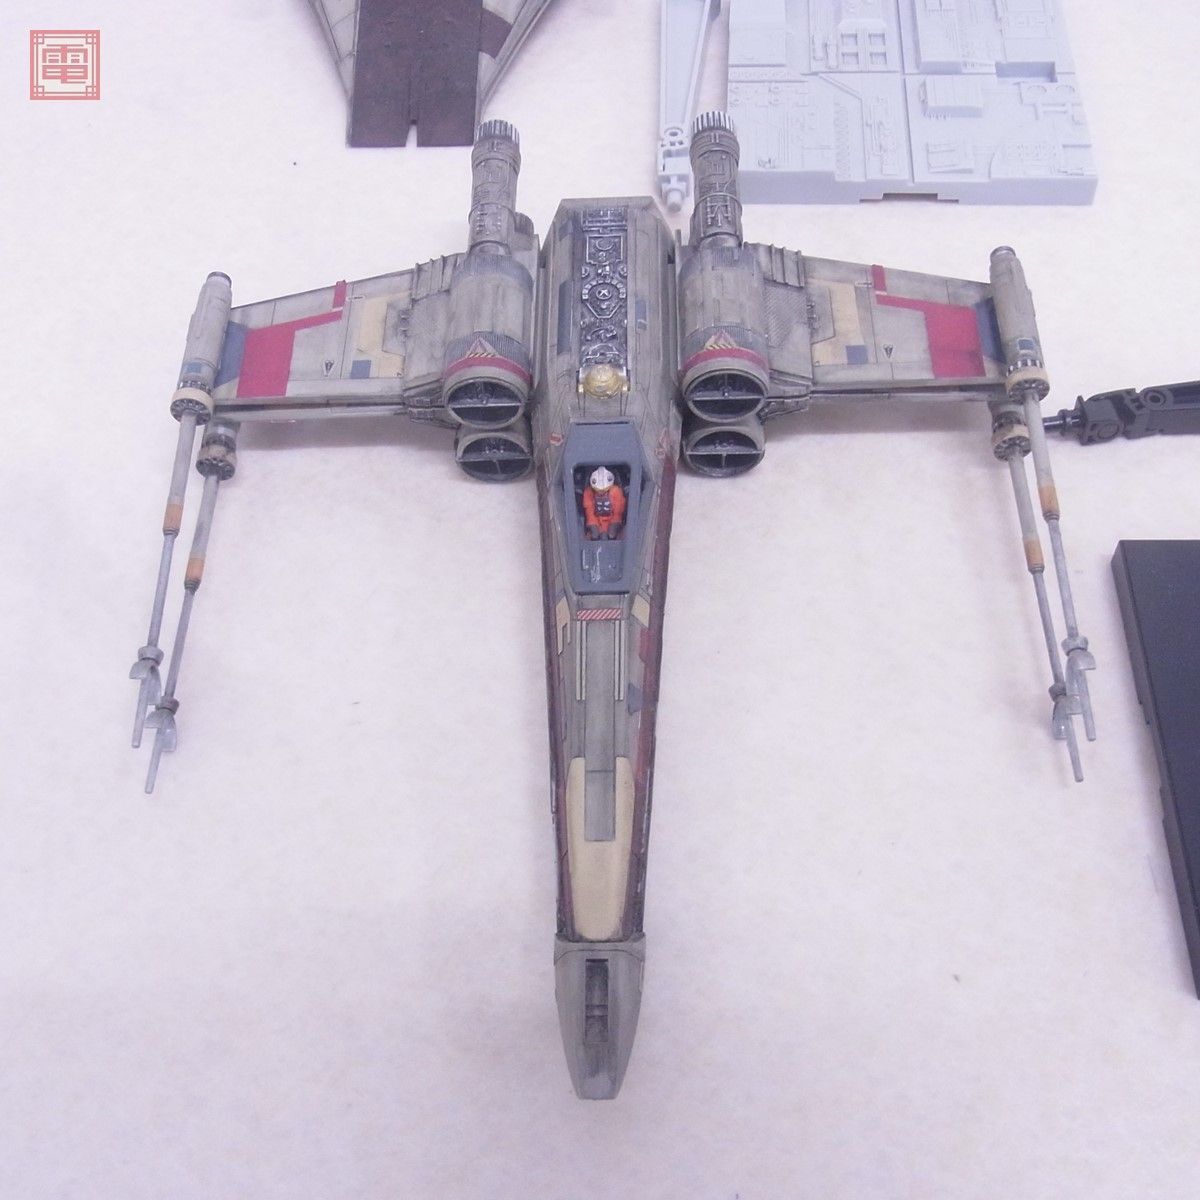  made goods Bandai 1/144 etc. Star Wars millenium * Falcon /X Wing * Star Fighter / snow Spee da- other total 9 point set present condition goods [20